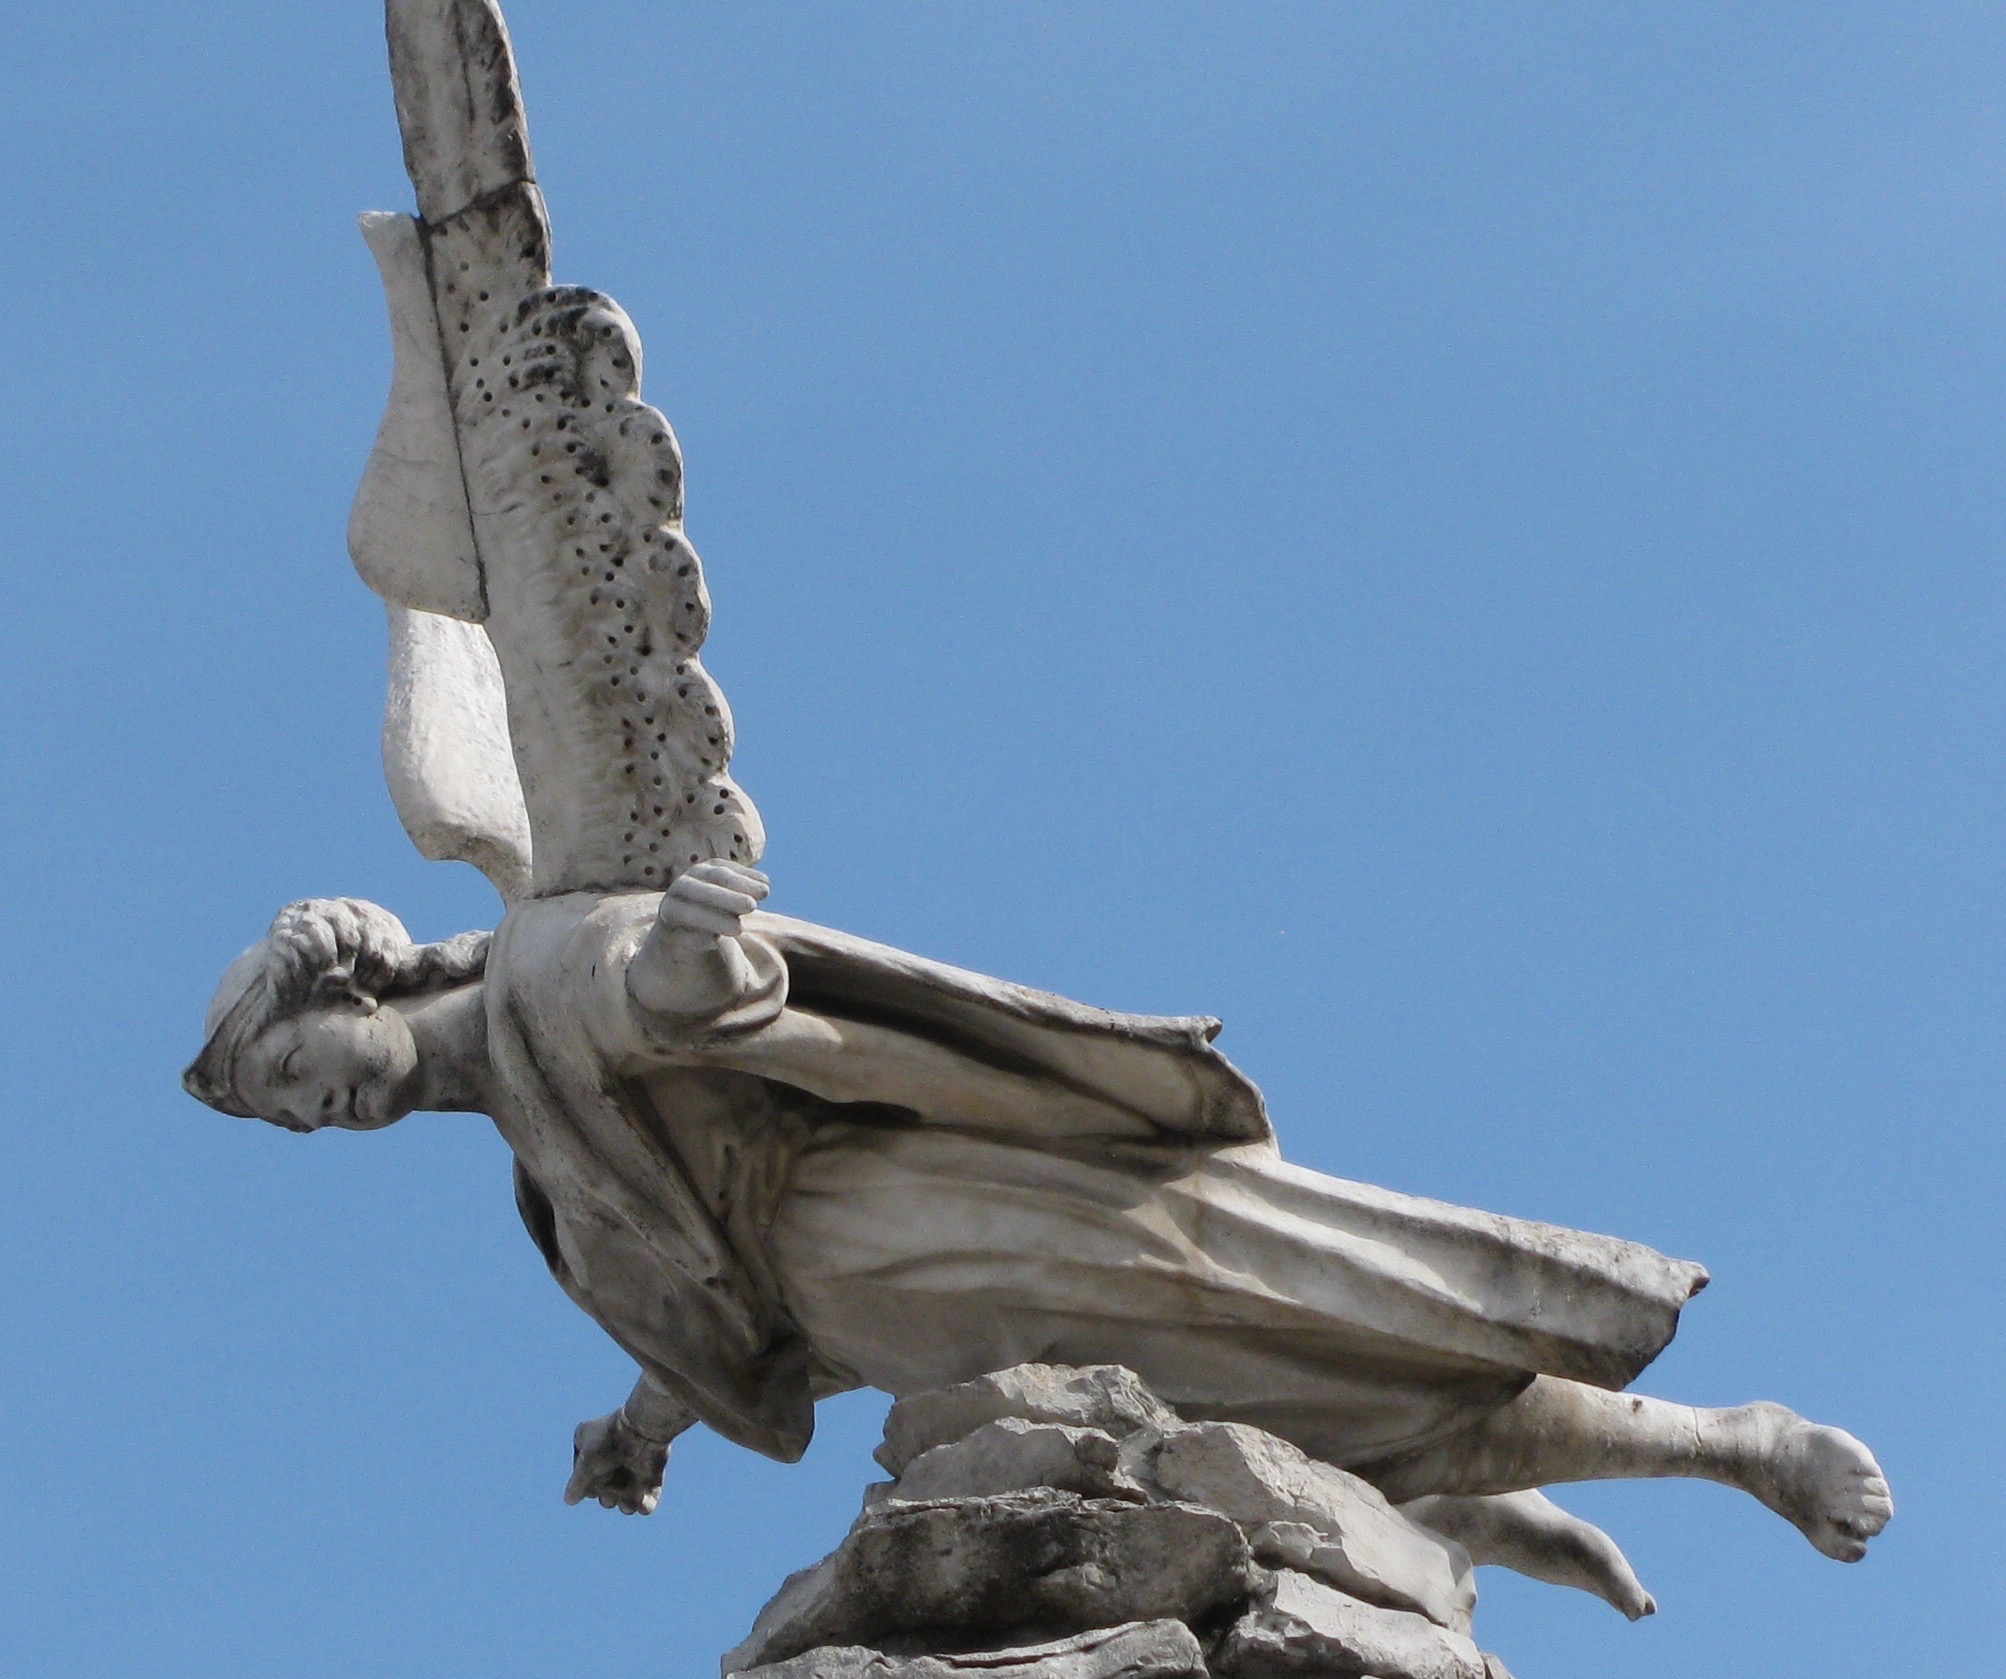 a statue has a long bird in its mouth